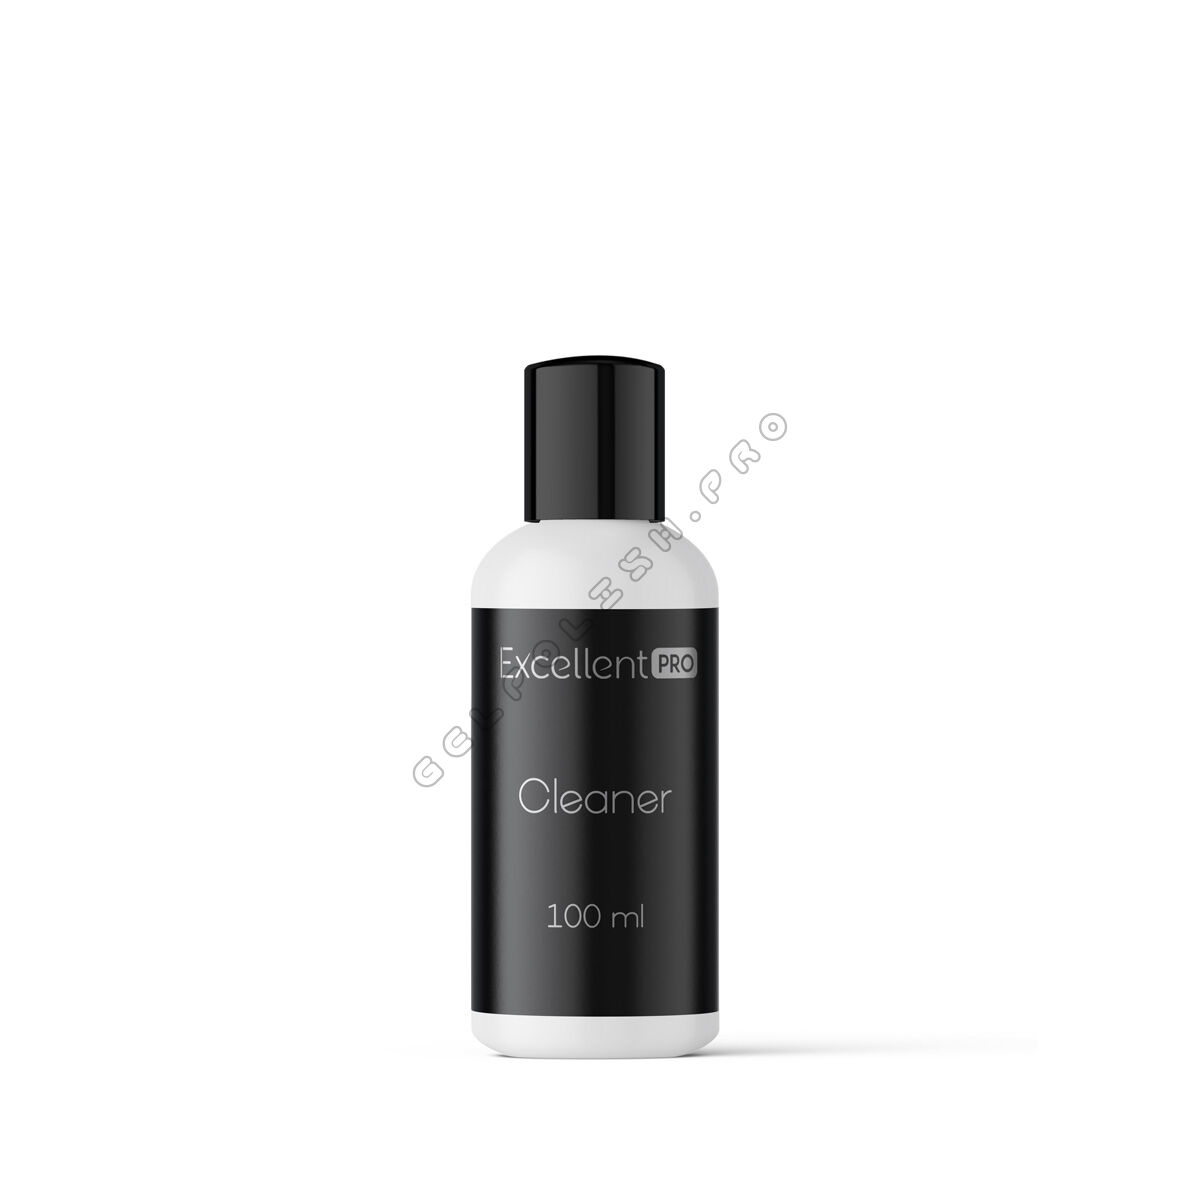 Excellent Pro Cleaner 100ml